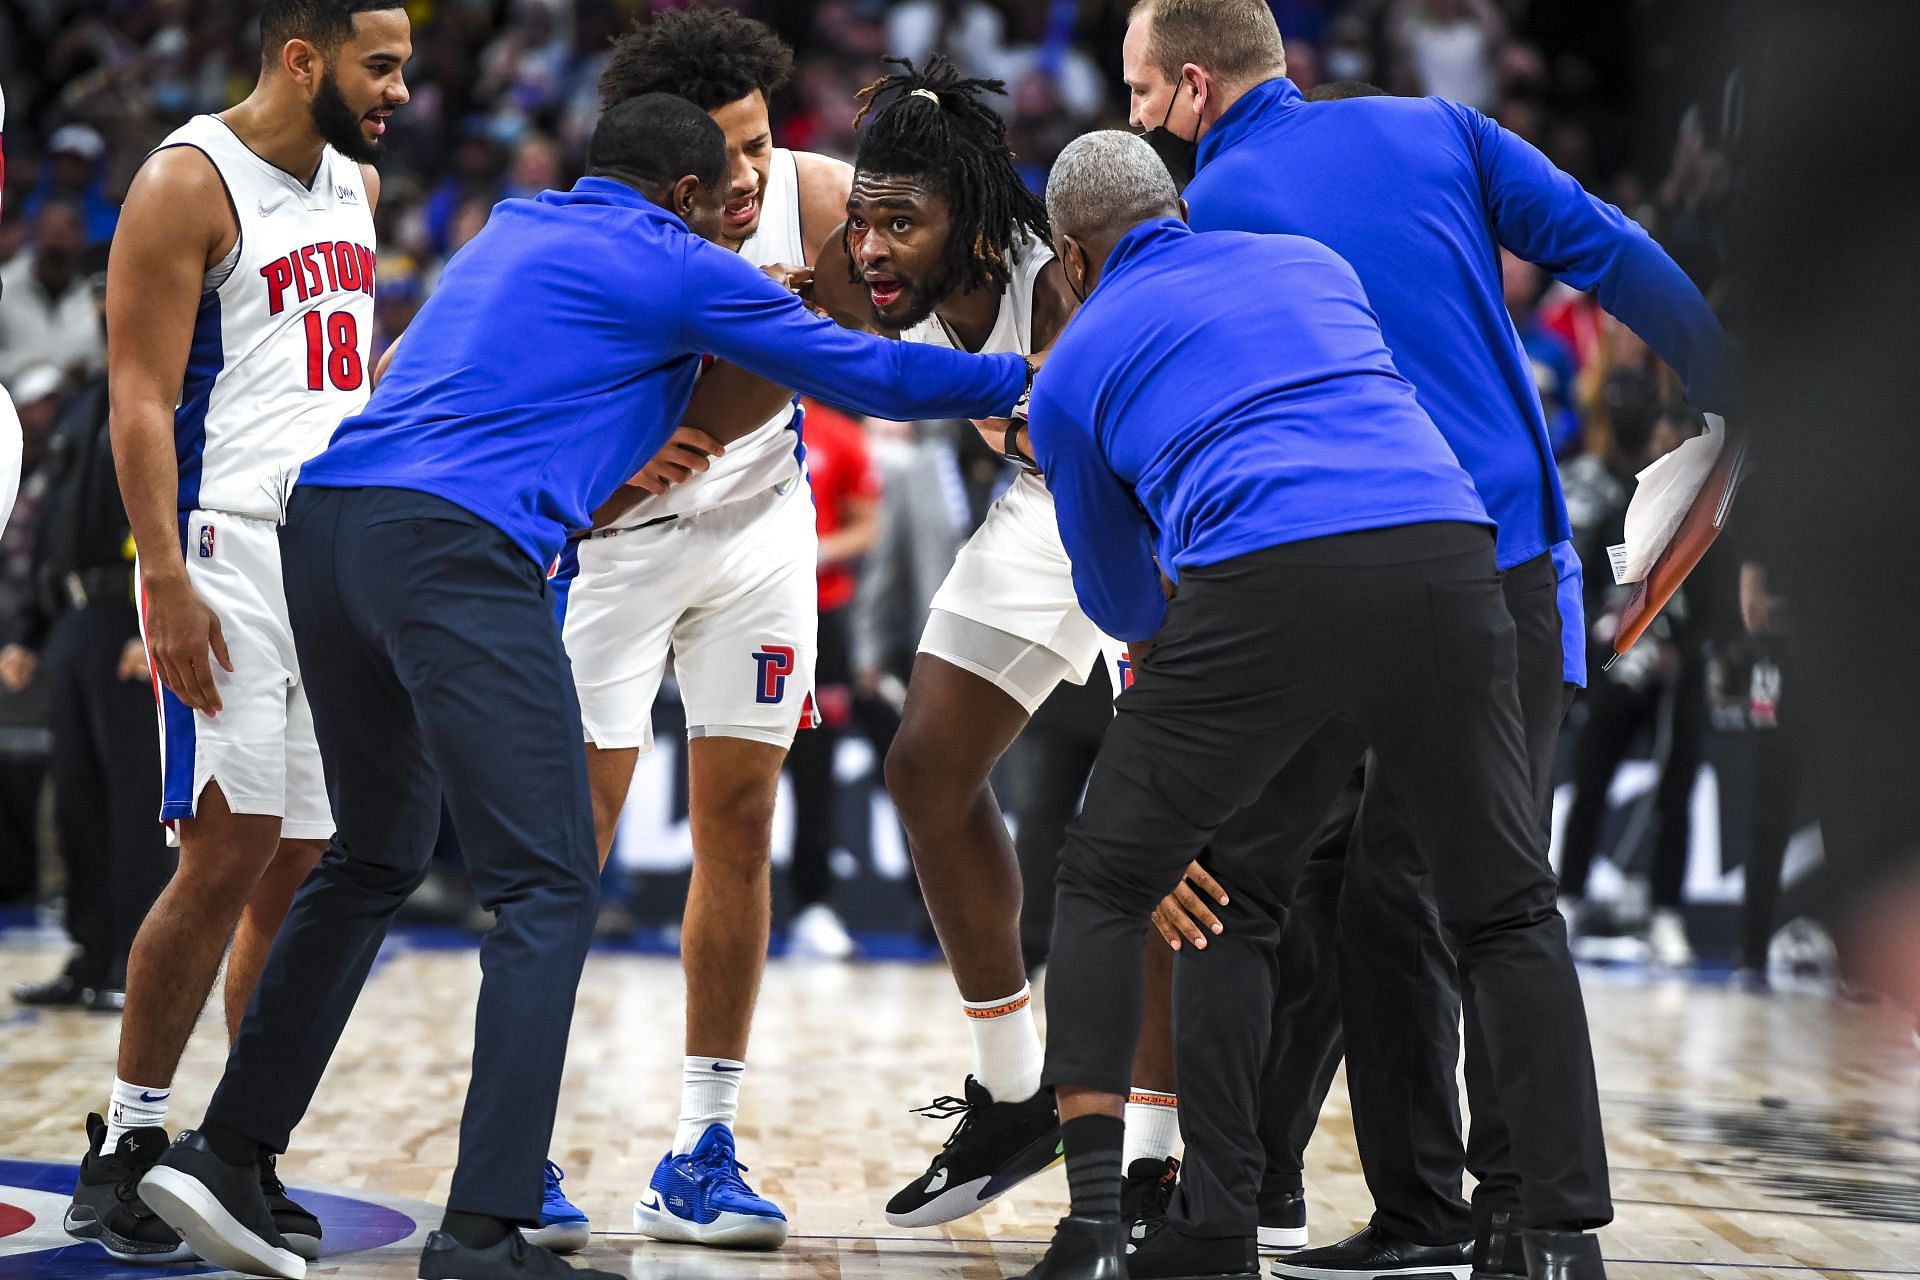 Detroit Pistons center Isaiah Stewart gets medical attention after an altercation with Los Angeles Lakers star LeBron James.